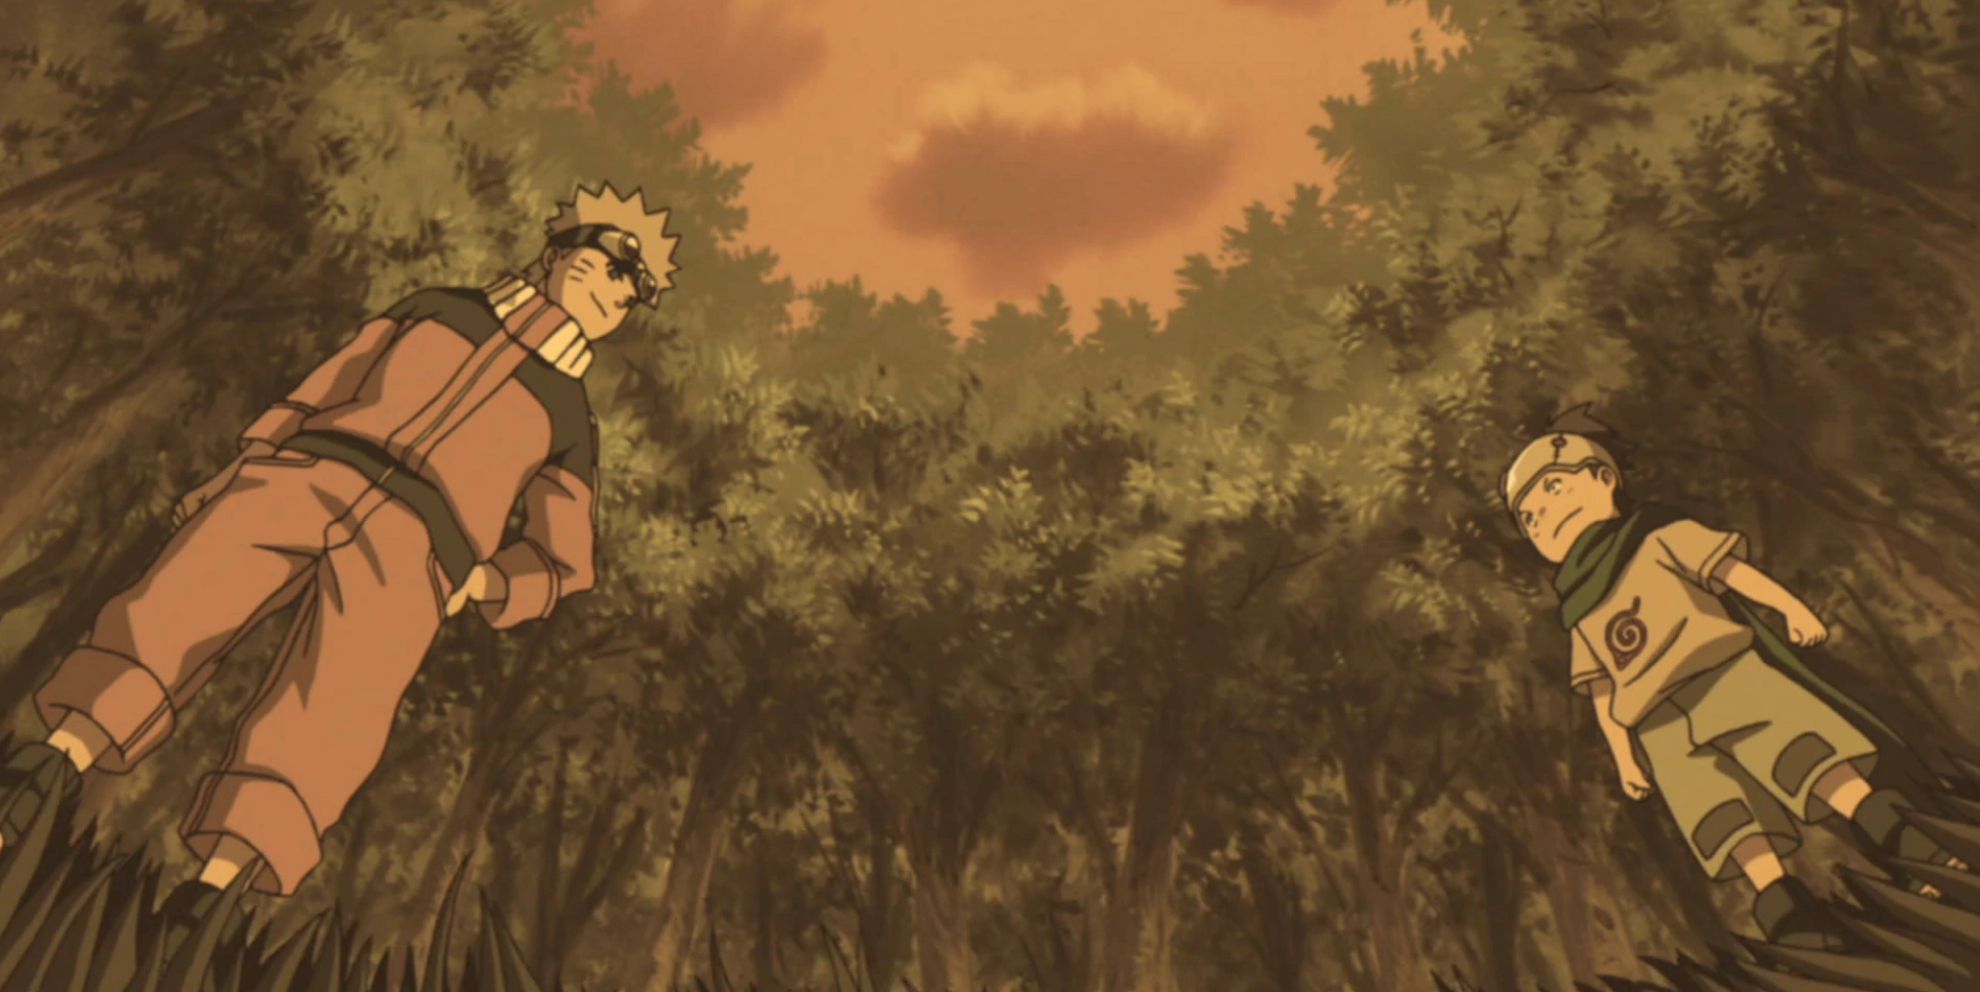 Naruto meets Konohamaru in the woods in the original anime series